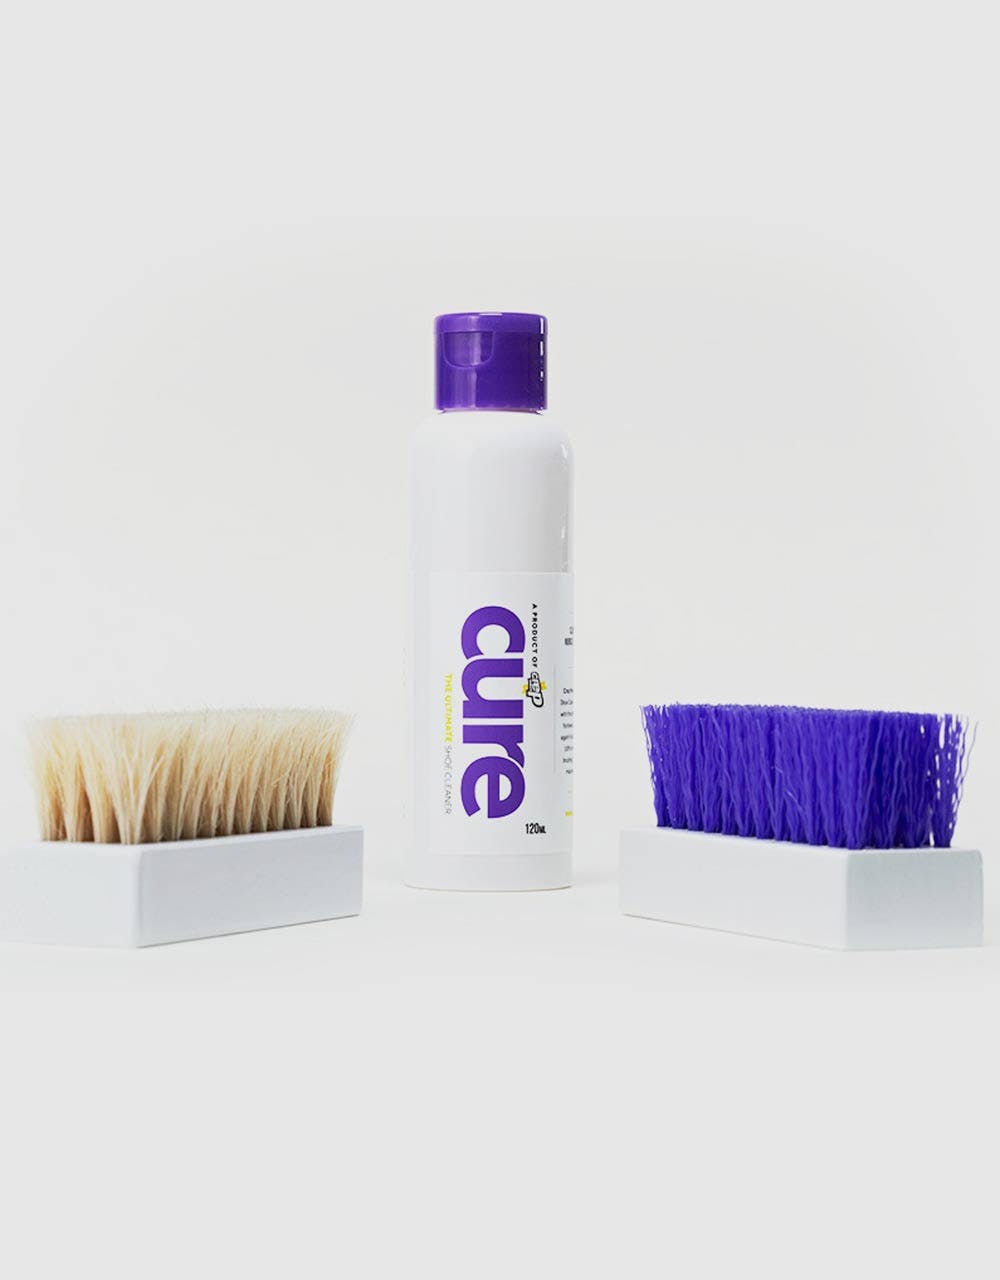 Crep Protect Cure Shoe Cleaning Kit